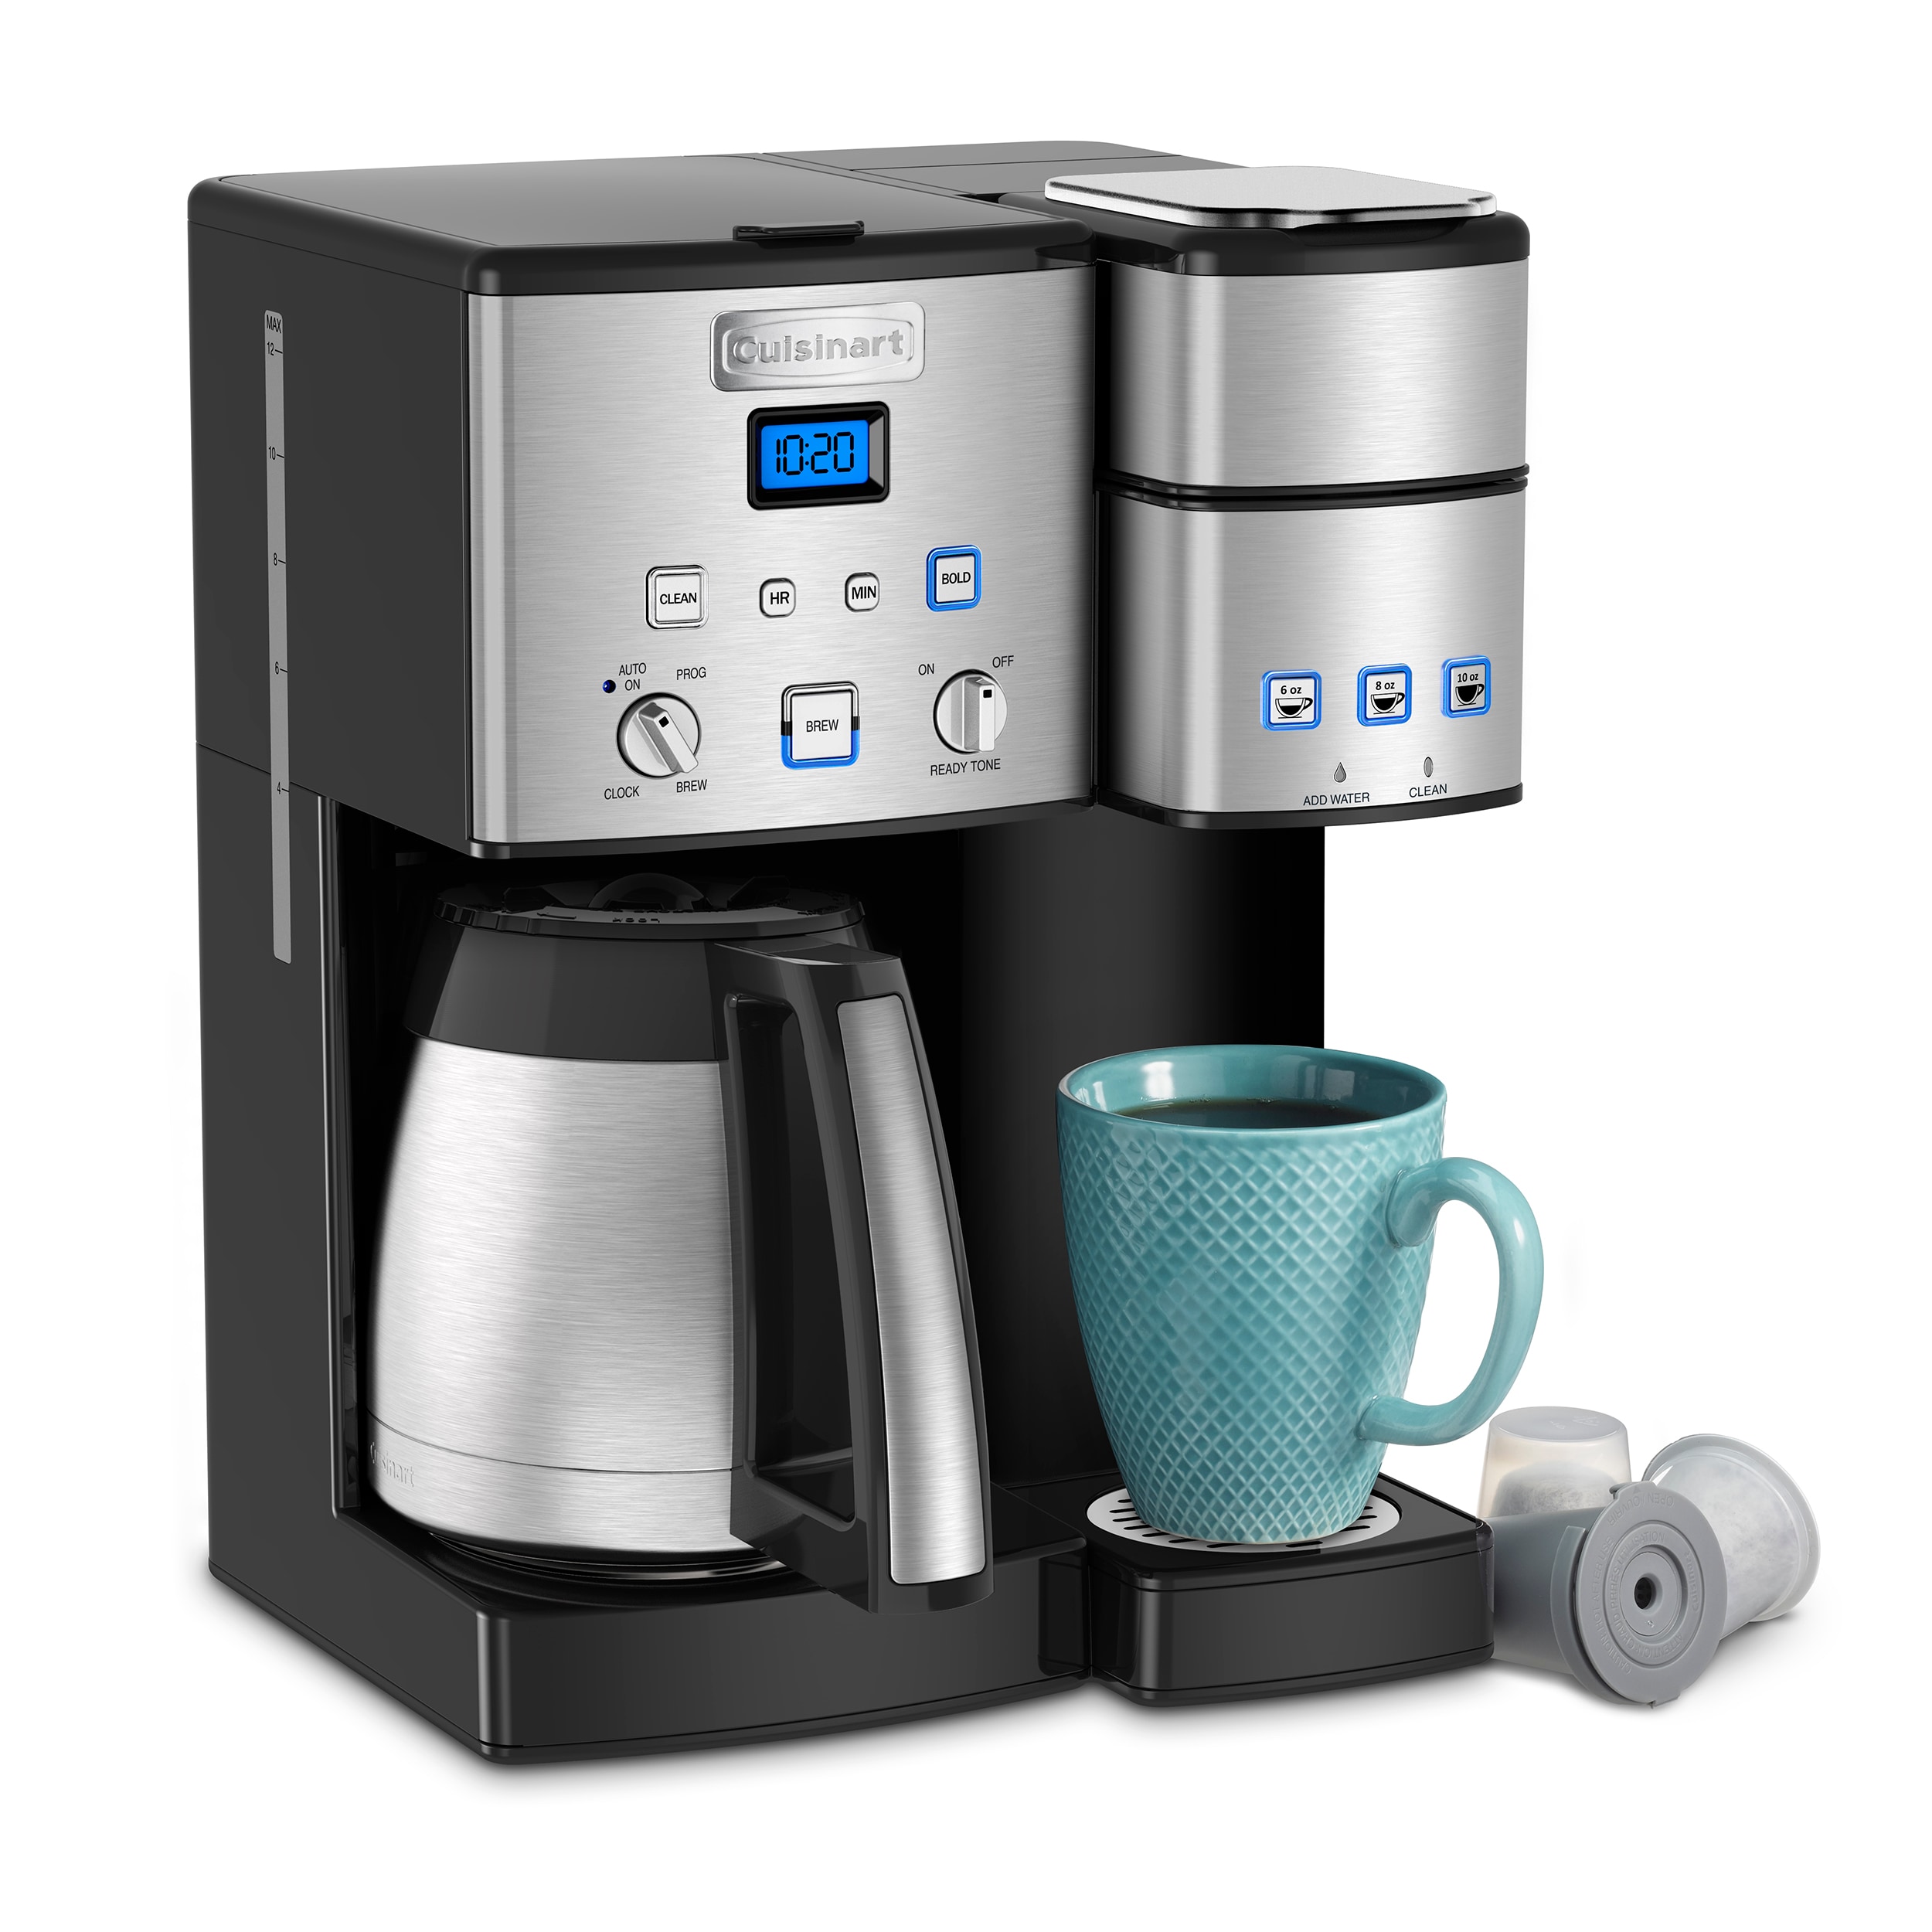 Nostalgia Retro 12-Cup Programmable Coffee Maker With LED Display,  Automatic Shut-Off & Keep Warm, Pause-And-Serve Function, Aqua